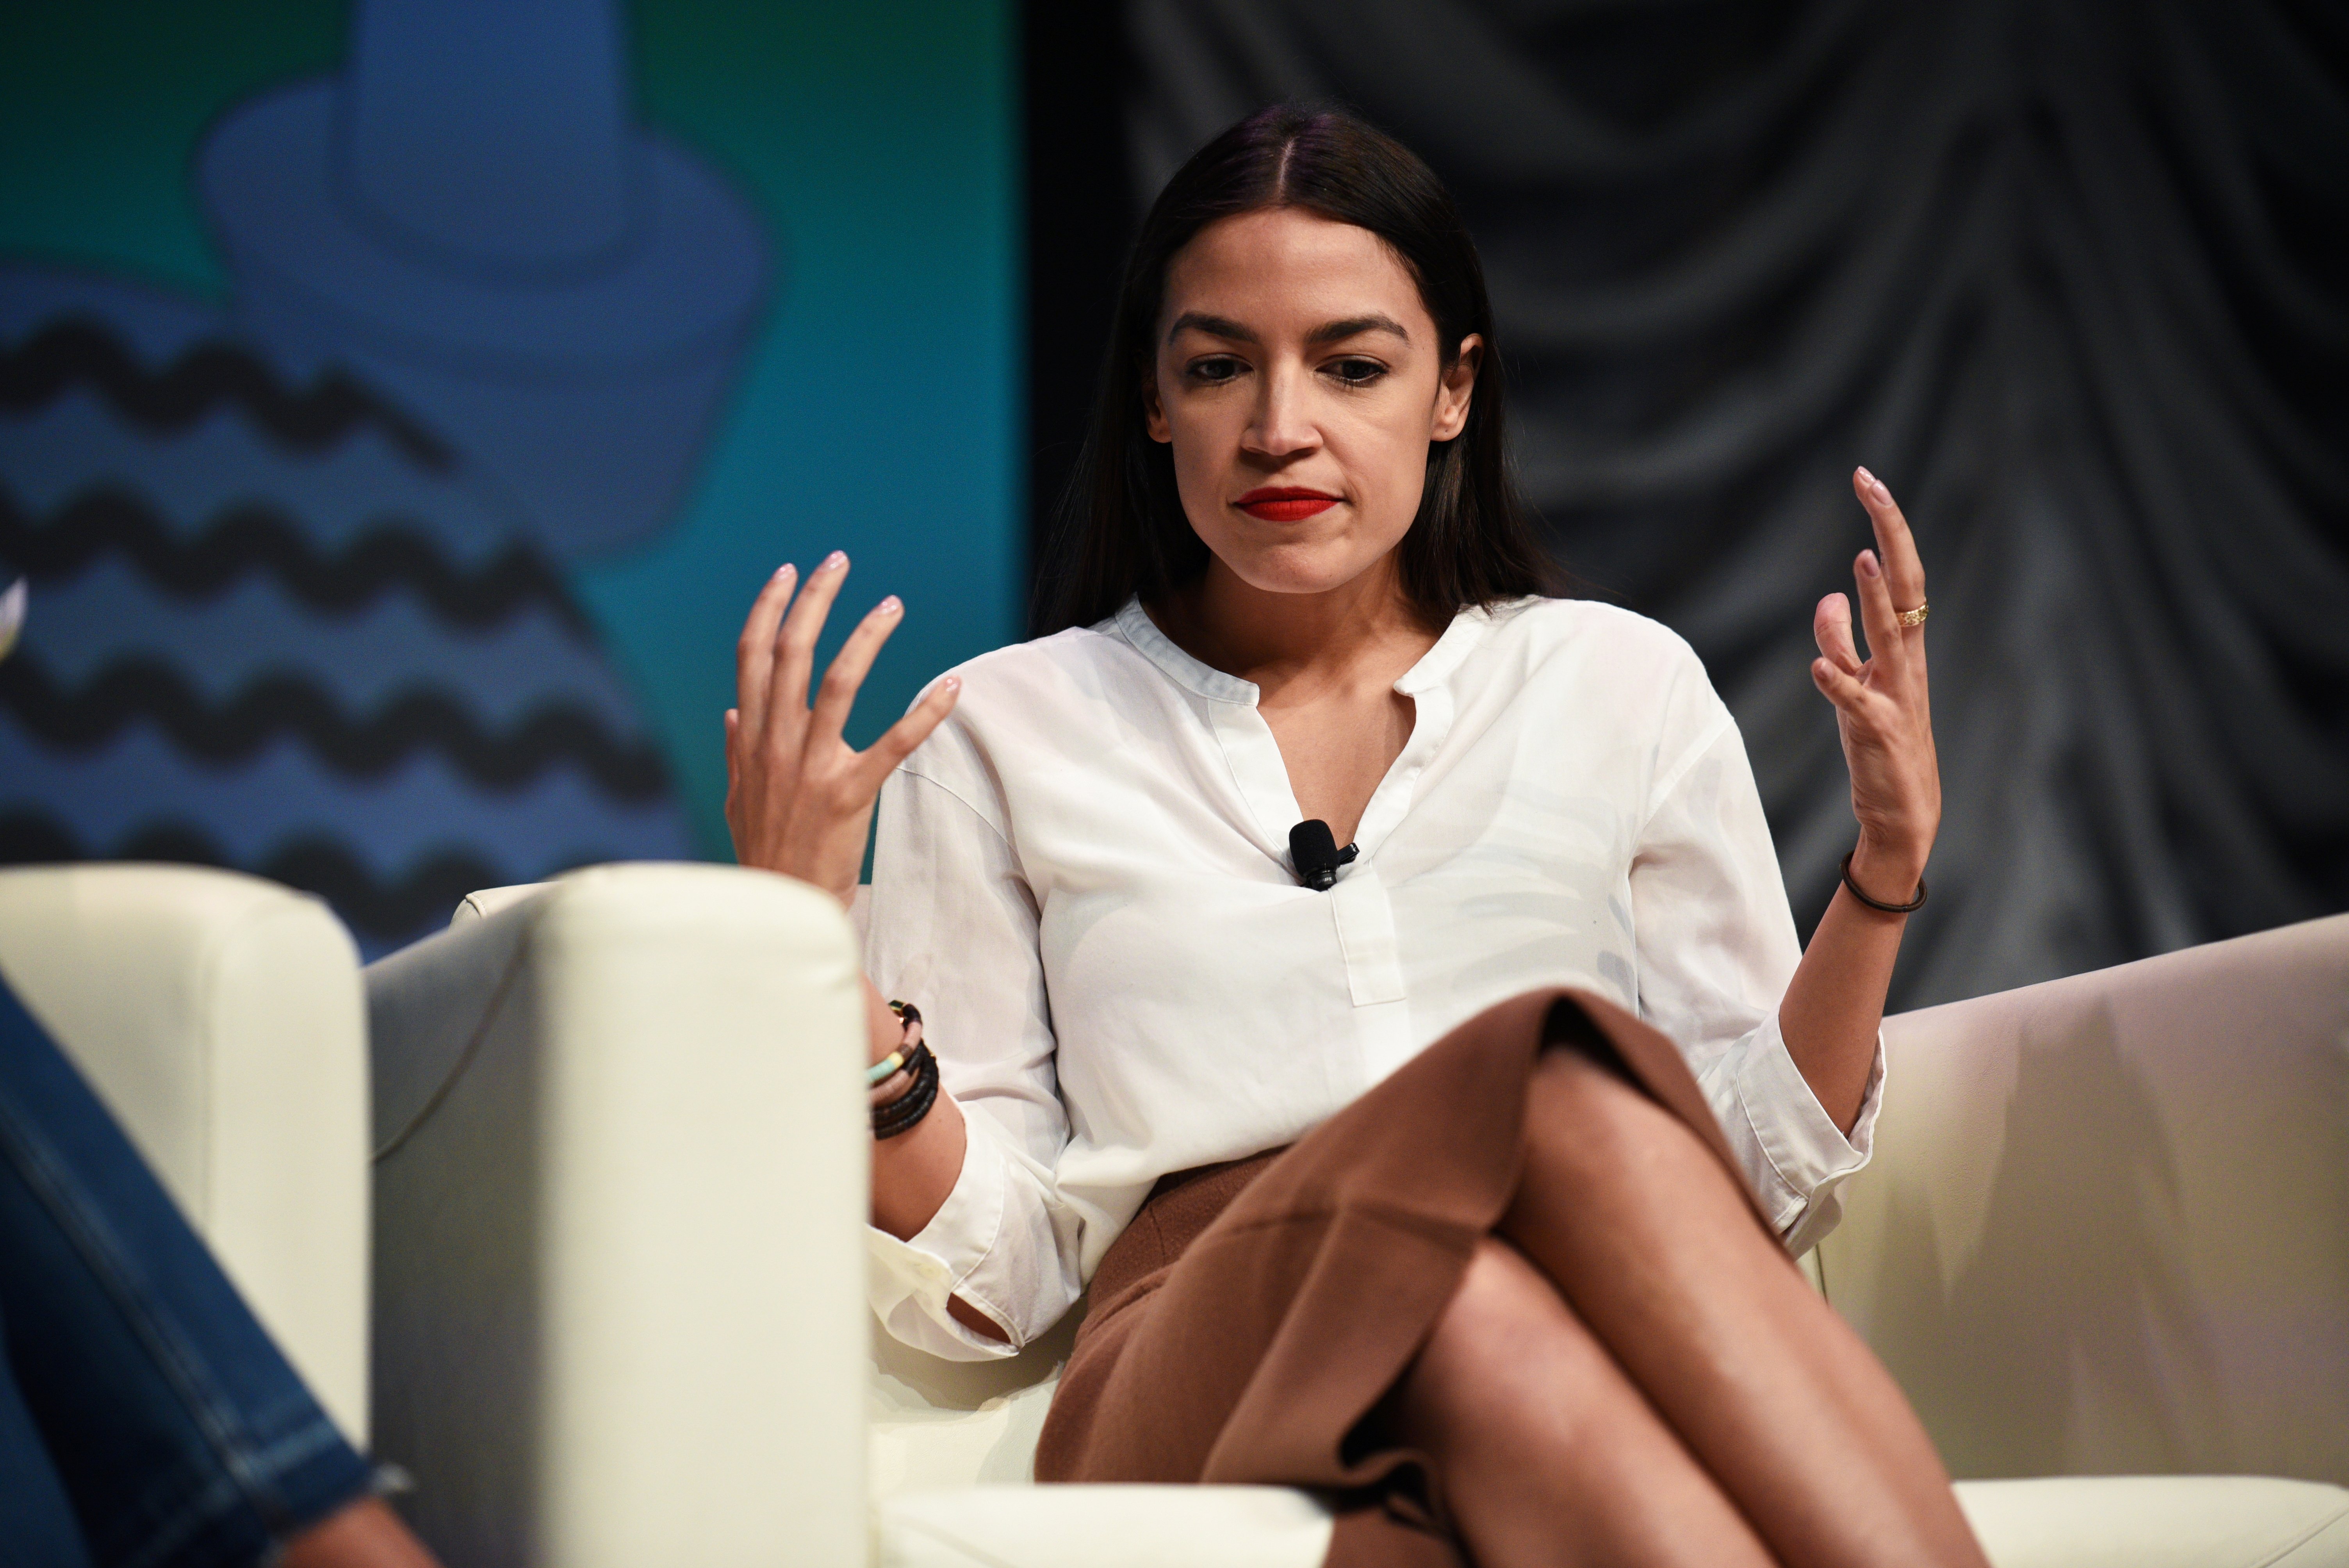 U.S. Congresswoman Alexandria Ocasio-Cortez speaks about the first few months of her tenure in congress with Briahna Gray at the South by Southwest (SXSW) conference and festivals in Austin, Texas, U.S., March 9, 2019. REUTERS/Sergio Flores